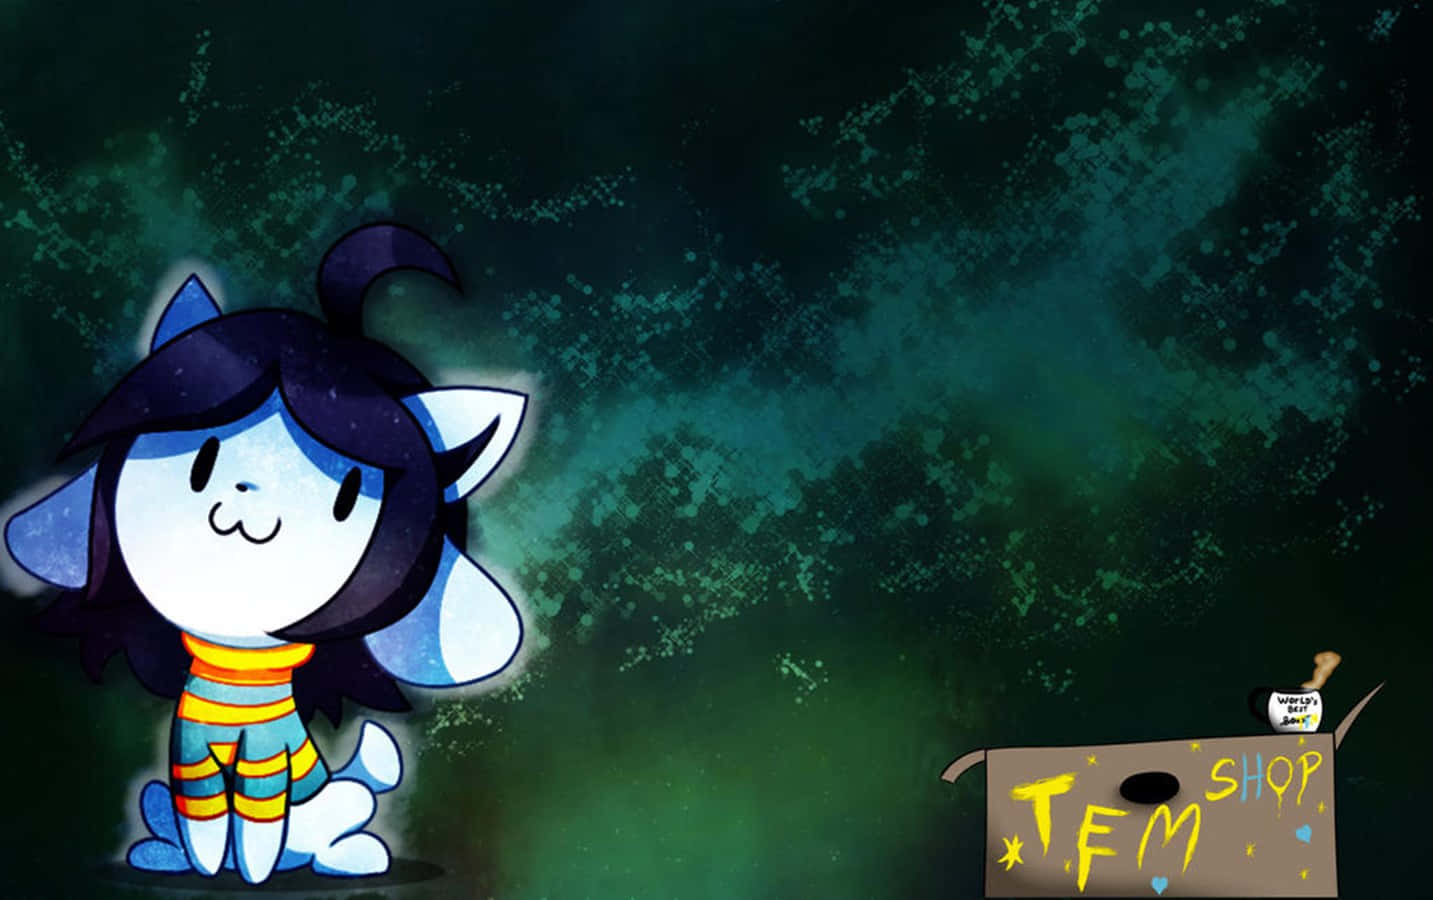 "Determination to succeed smiling Temmie from Undertale" Wallpaper